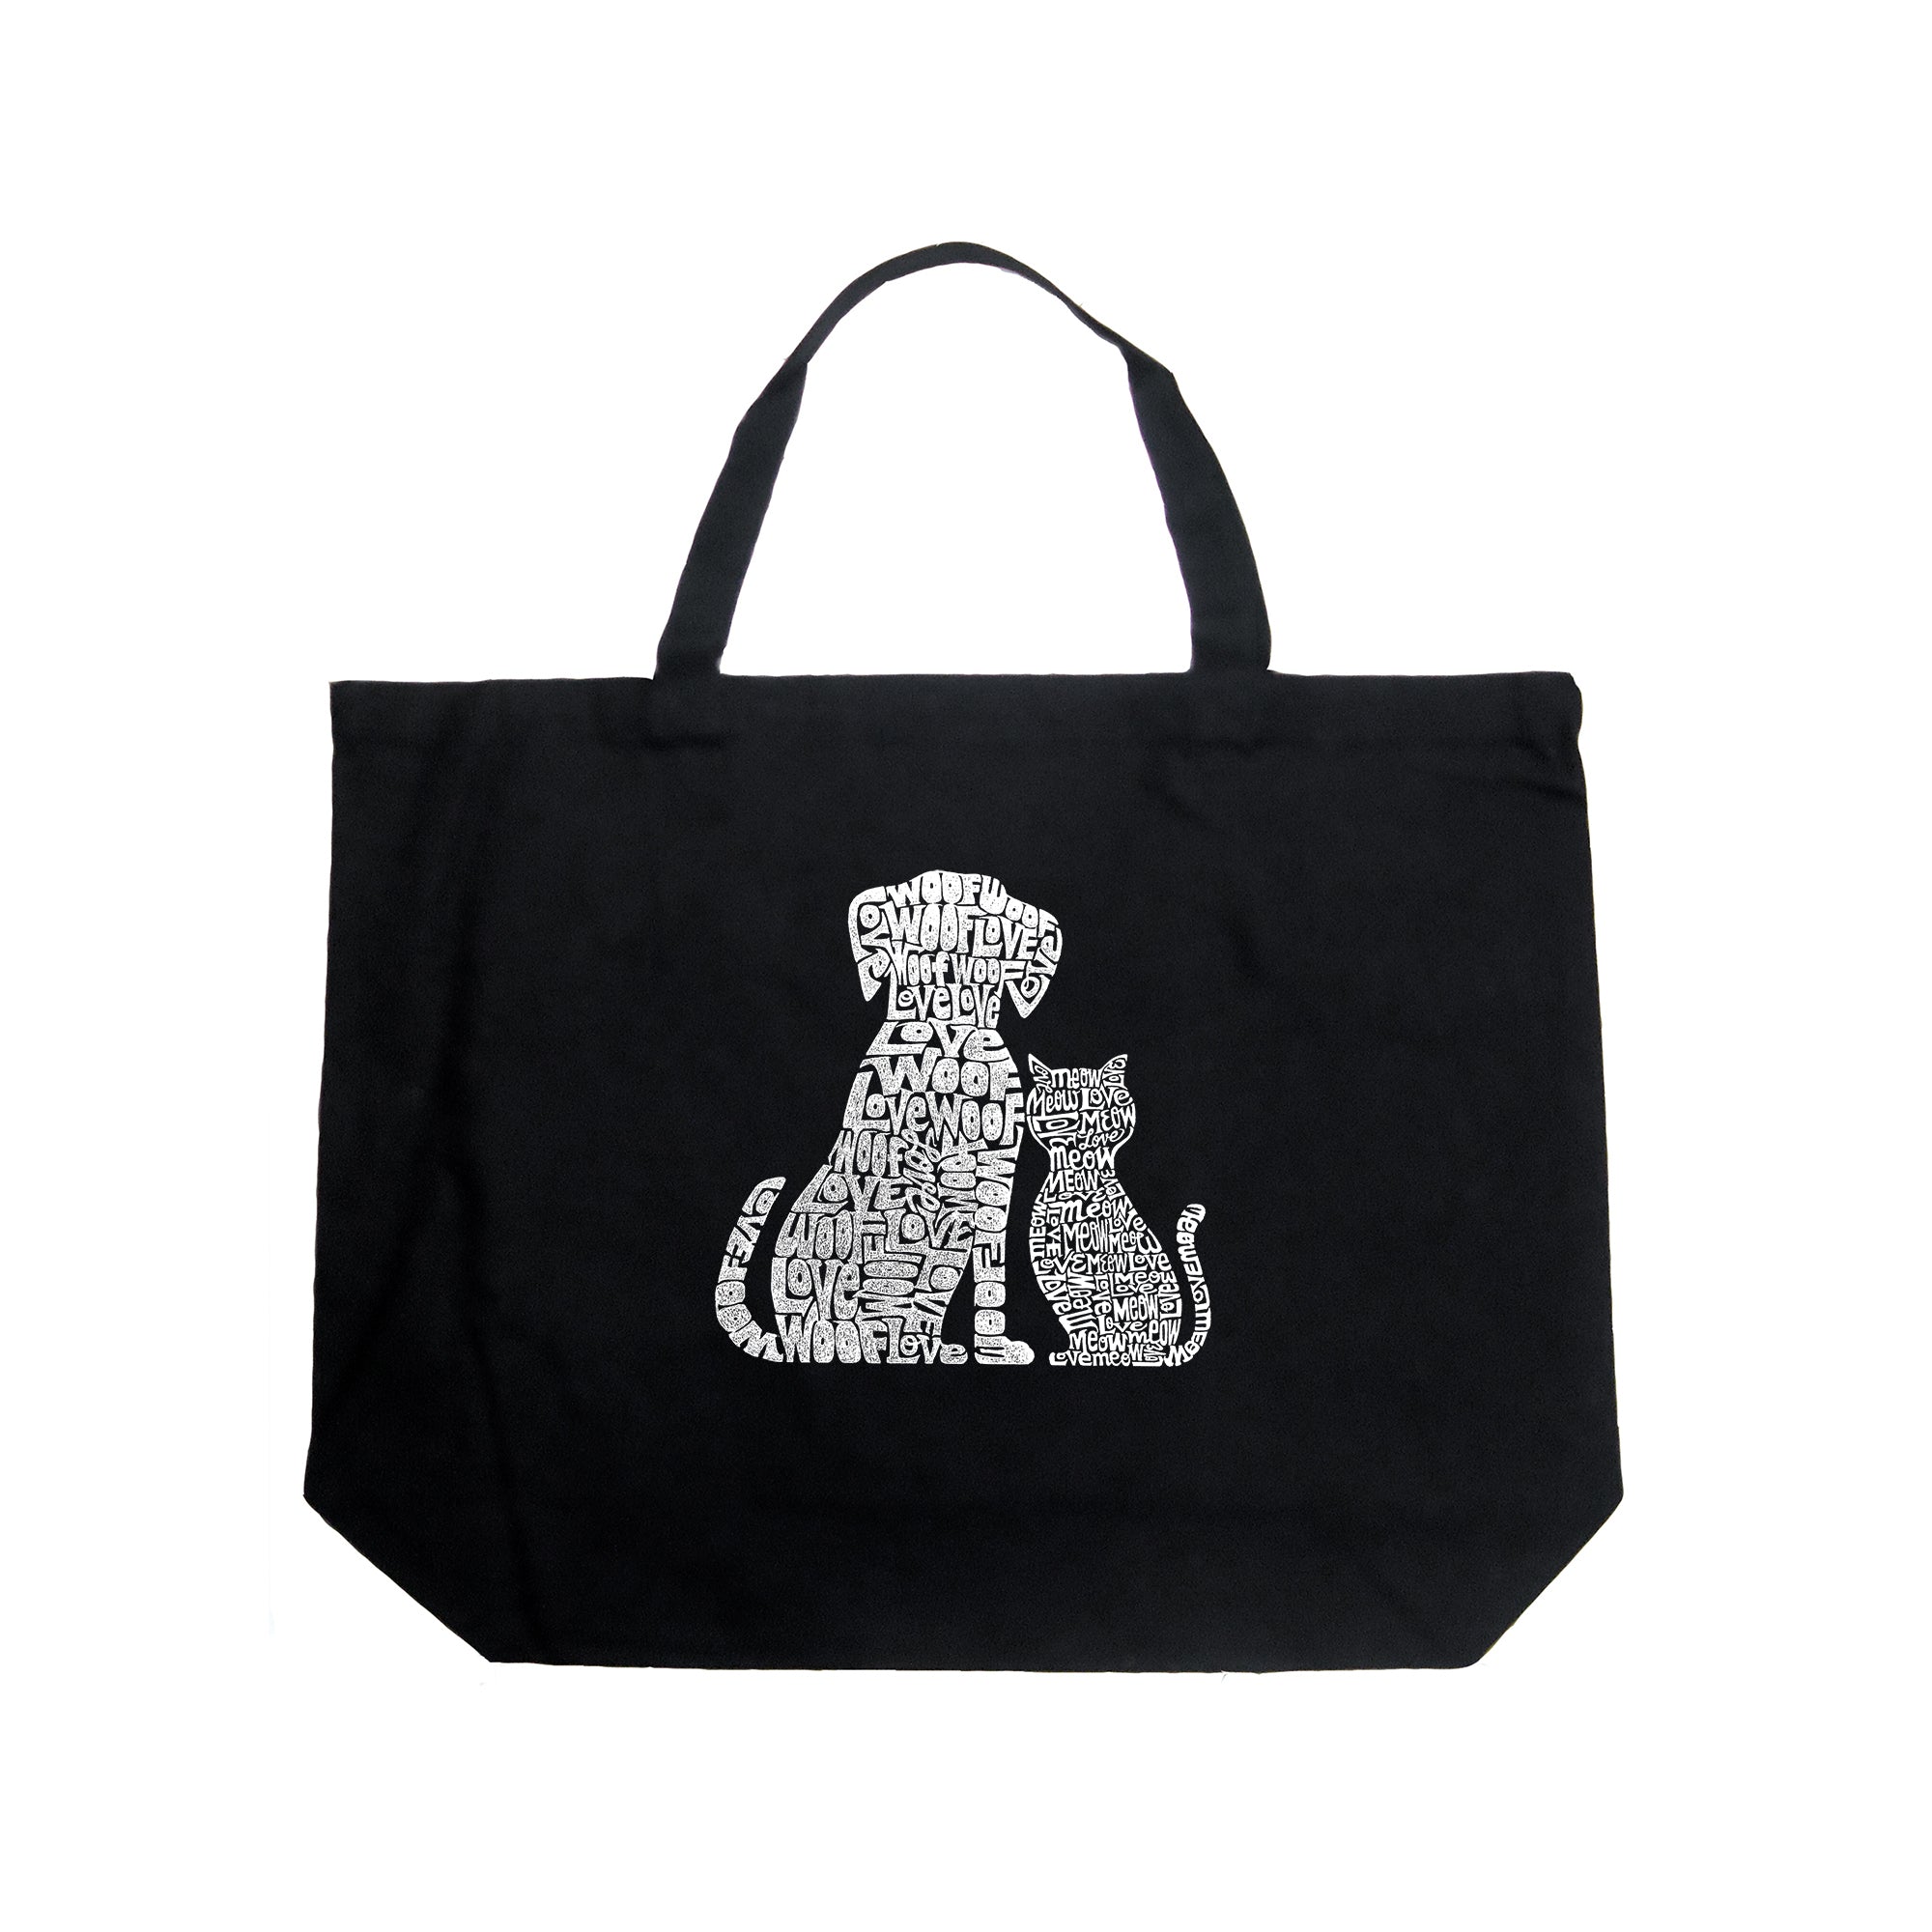 Large Word Art Tote Bag - Dogs And Cats - Large - Red